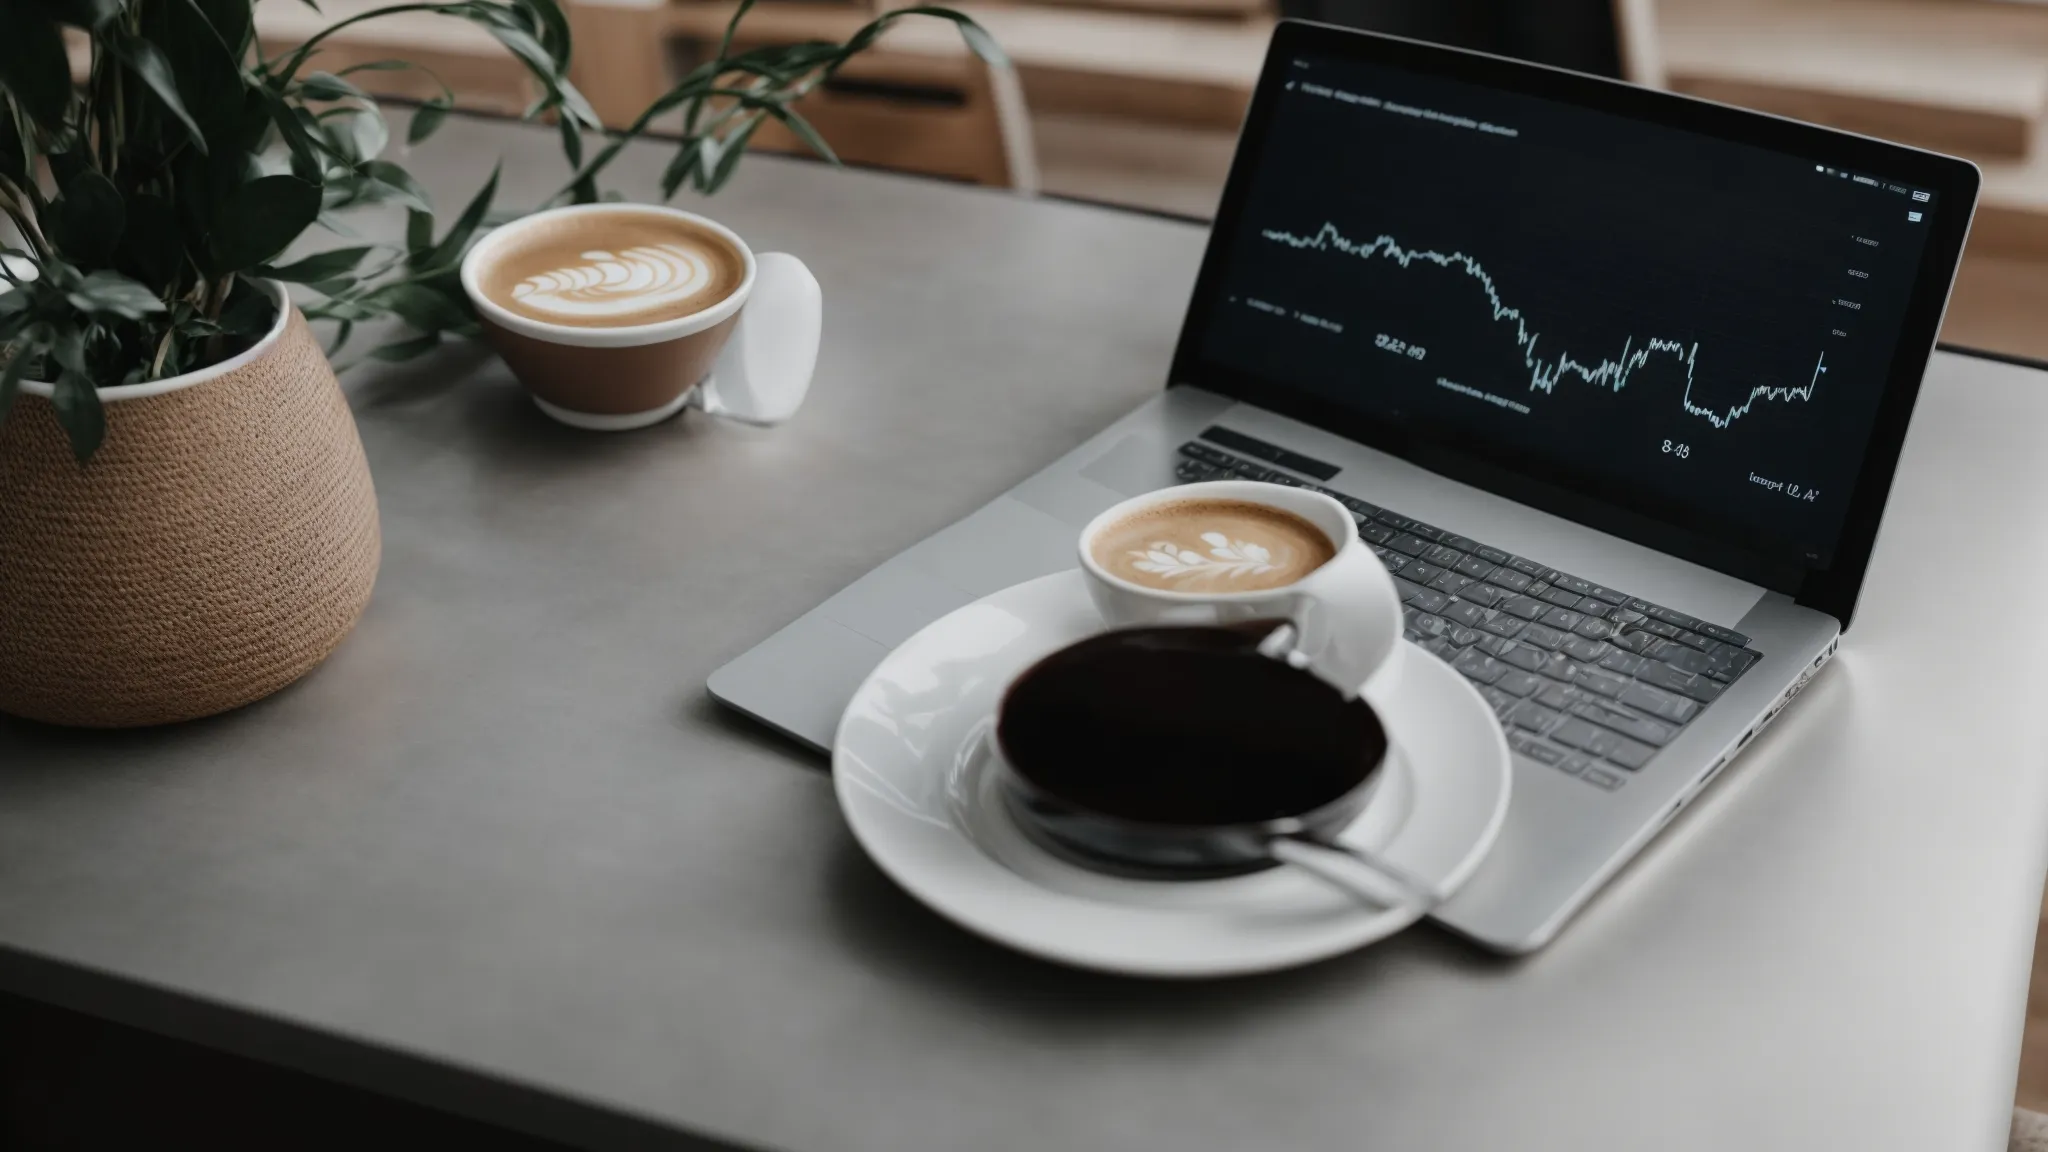 a laptop with graphs on the screen placed on a table next to a cup of coffee.